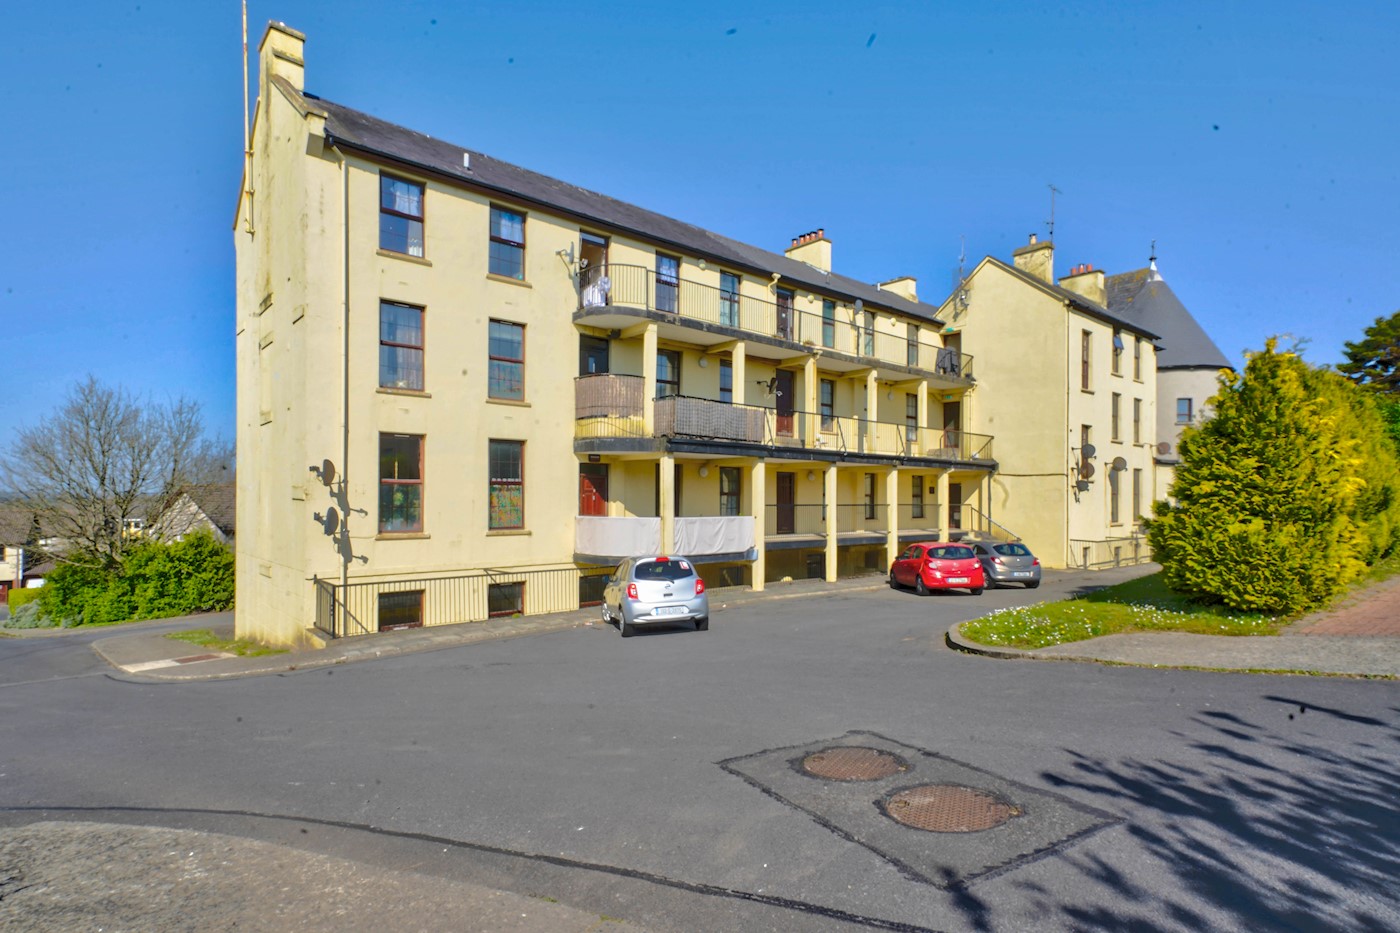 Apartment 25, Priory House, Priory Hall, Spawell Road, Wexford Town, Co. Wexford, Y35 EN83 1/17